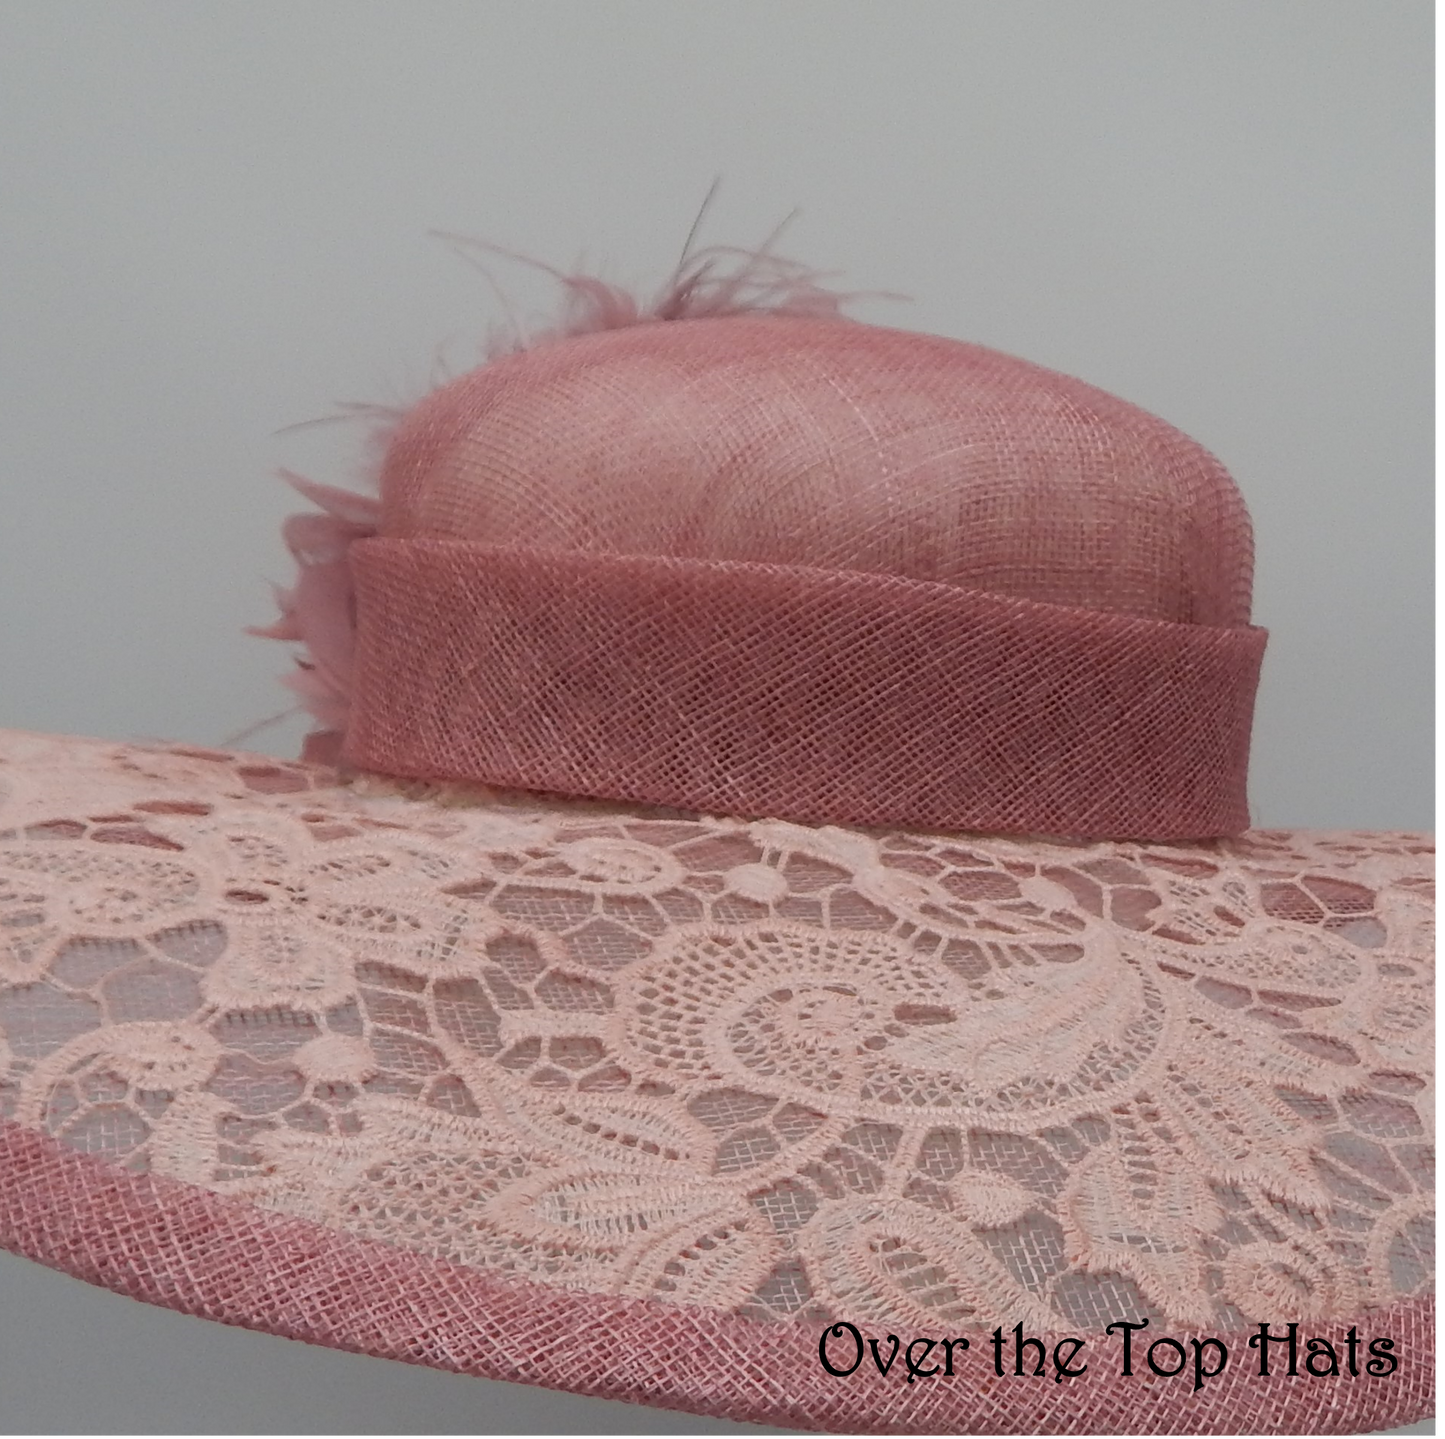 Beautiful Pink/Rose Sinamay and Lace Big Brimmed Hat for Kentucky Derby, Steeplechase, Ascot, or Weddings